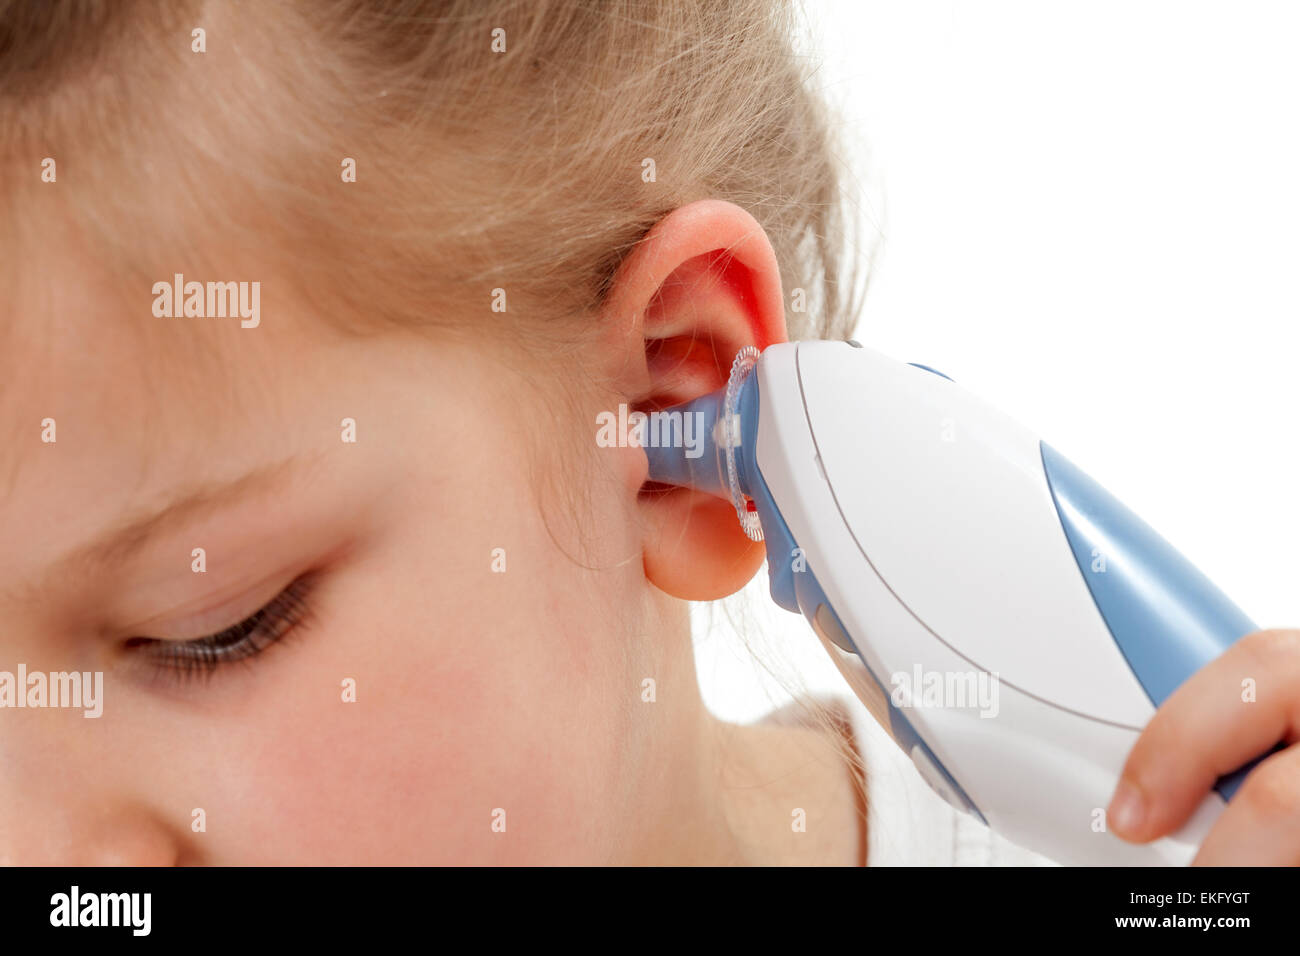 Taking temperature with ear thermometer Stock Photo